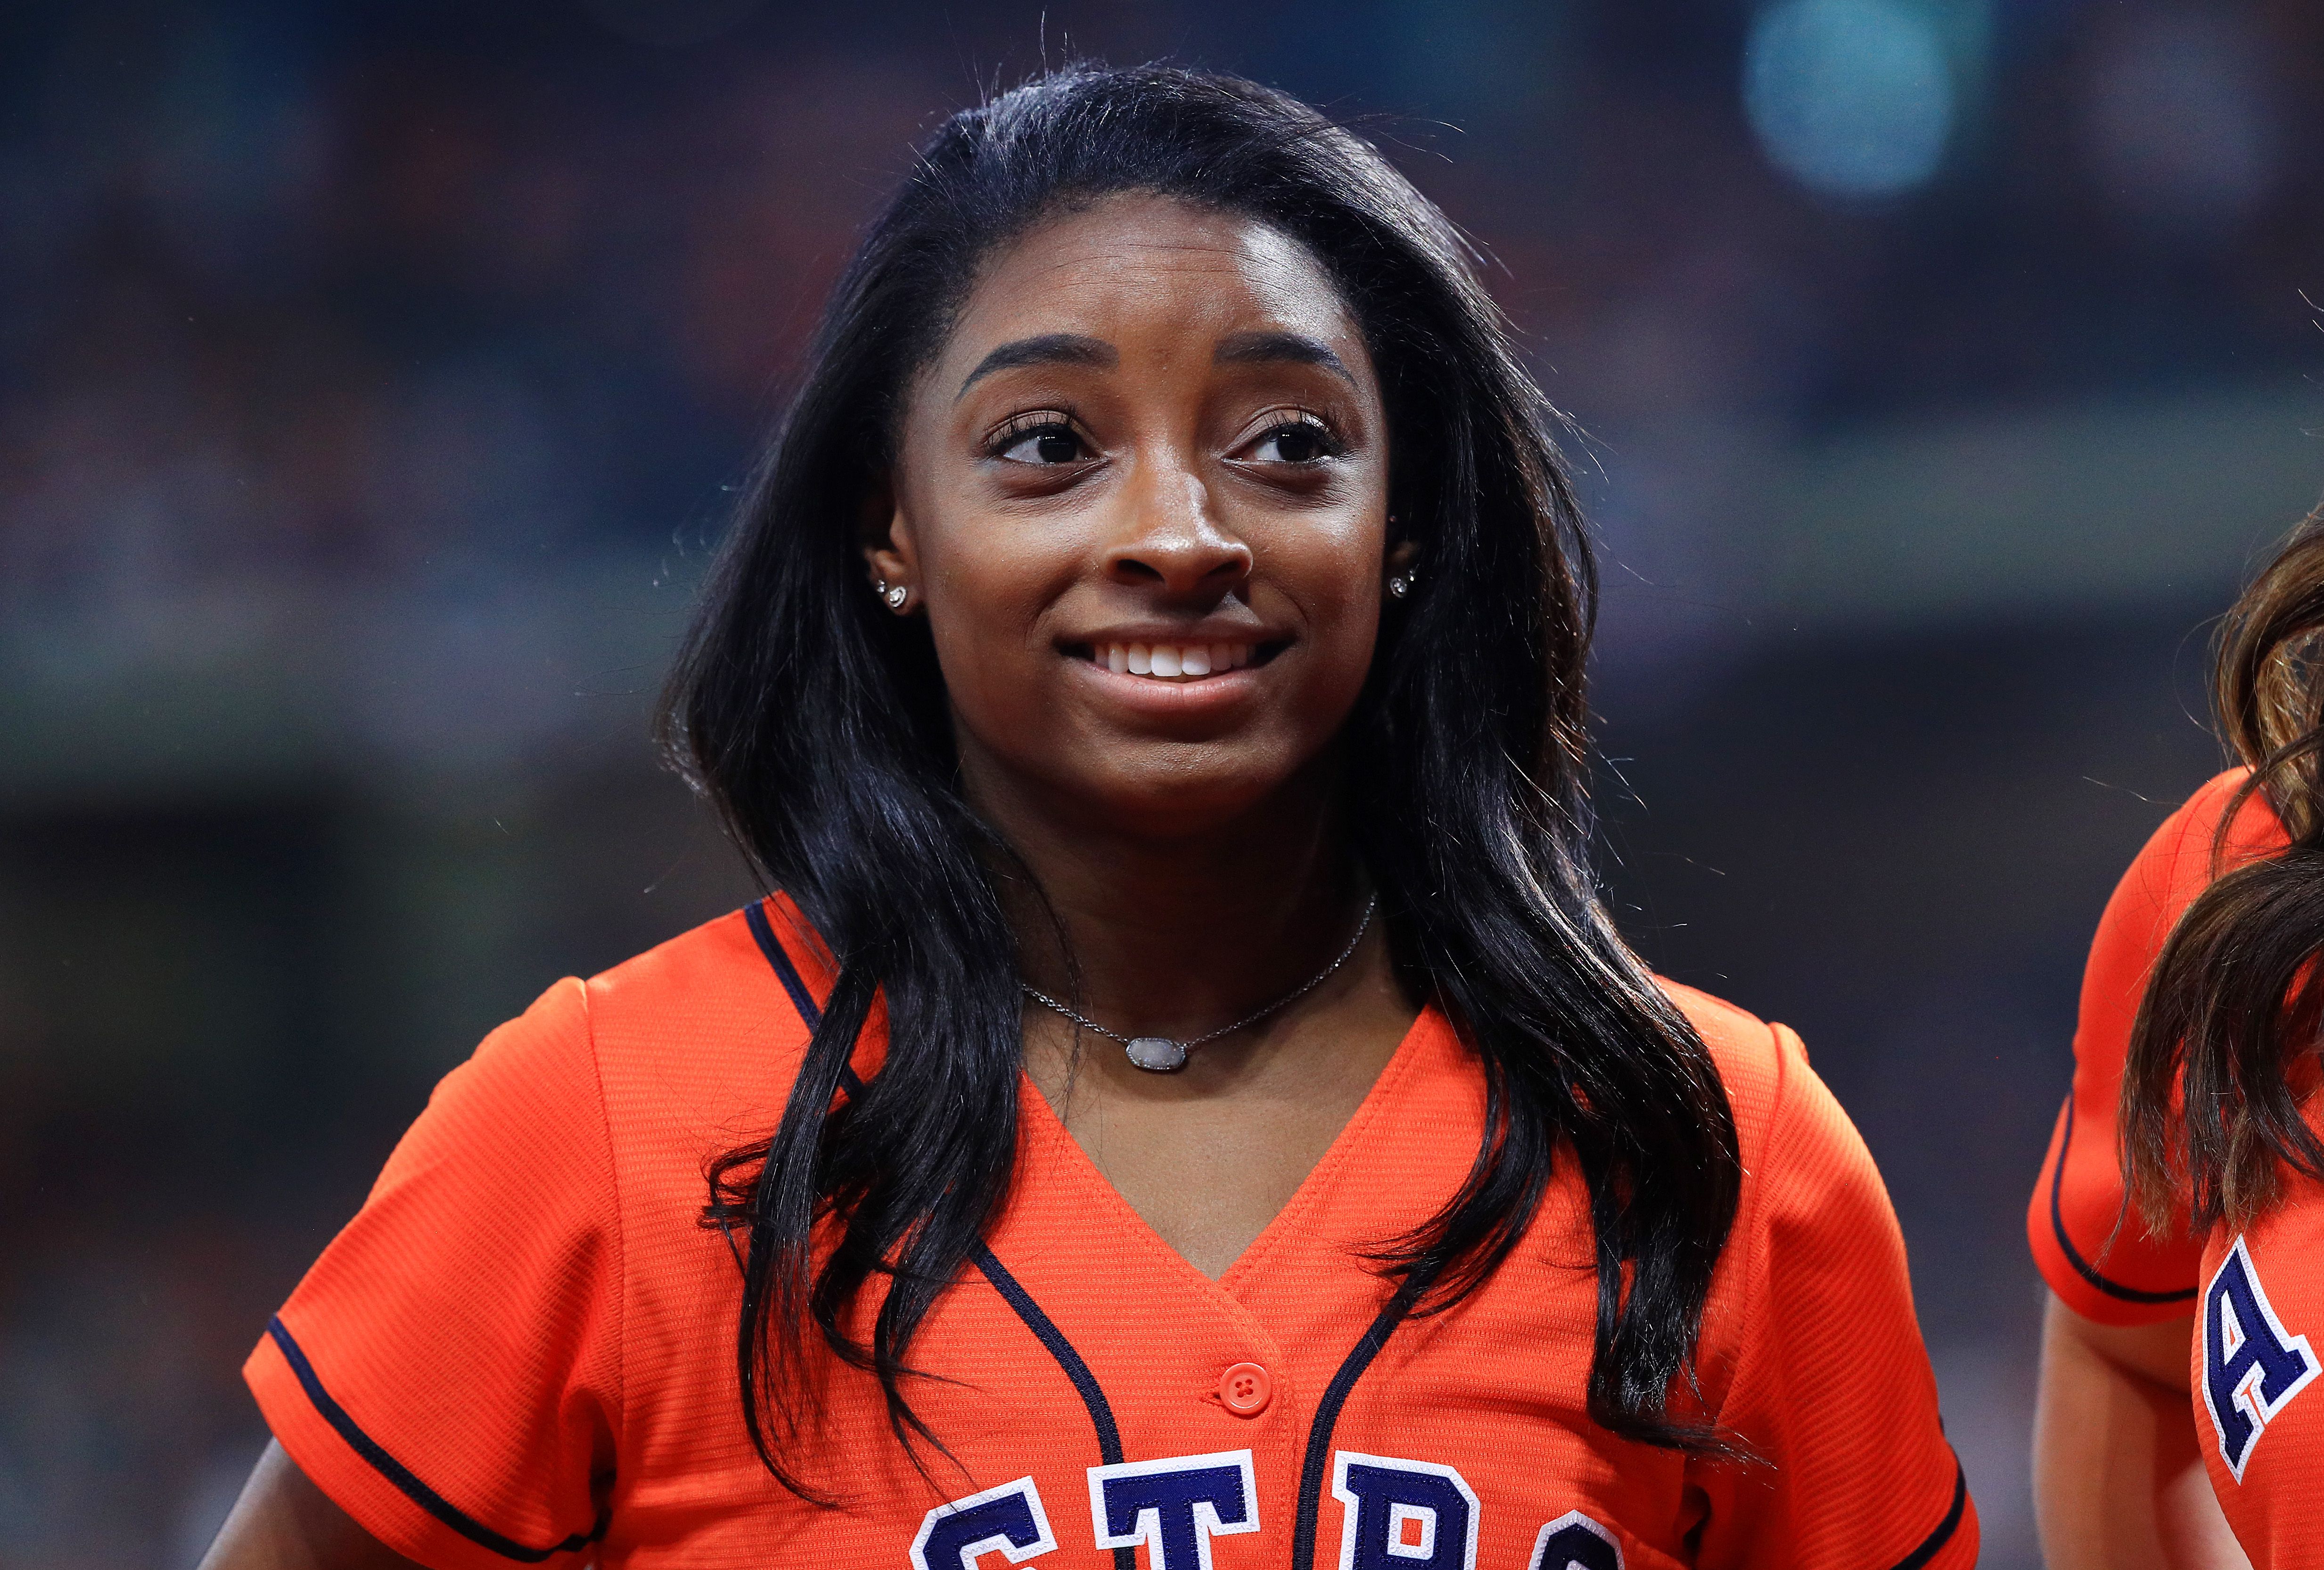 Gymnast Simone Biles at the 2019 World Series at Minute Maid Park on October 23, 2019 | Photo: Getty Images